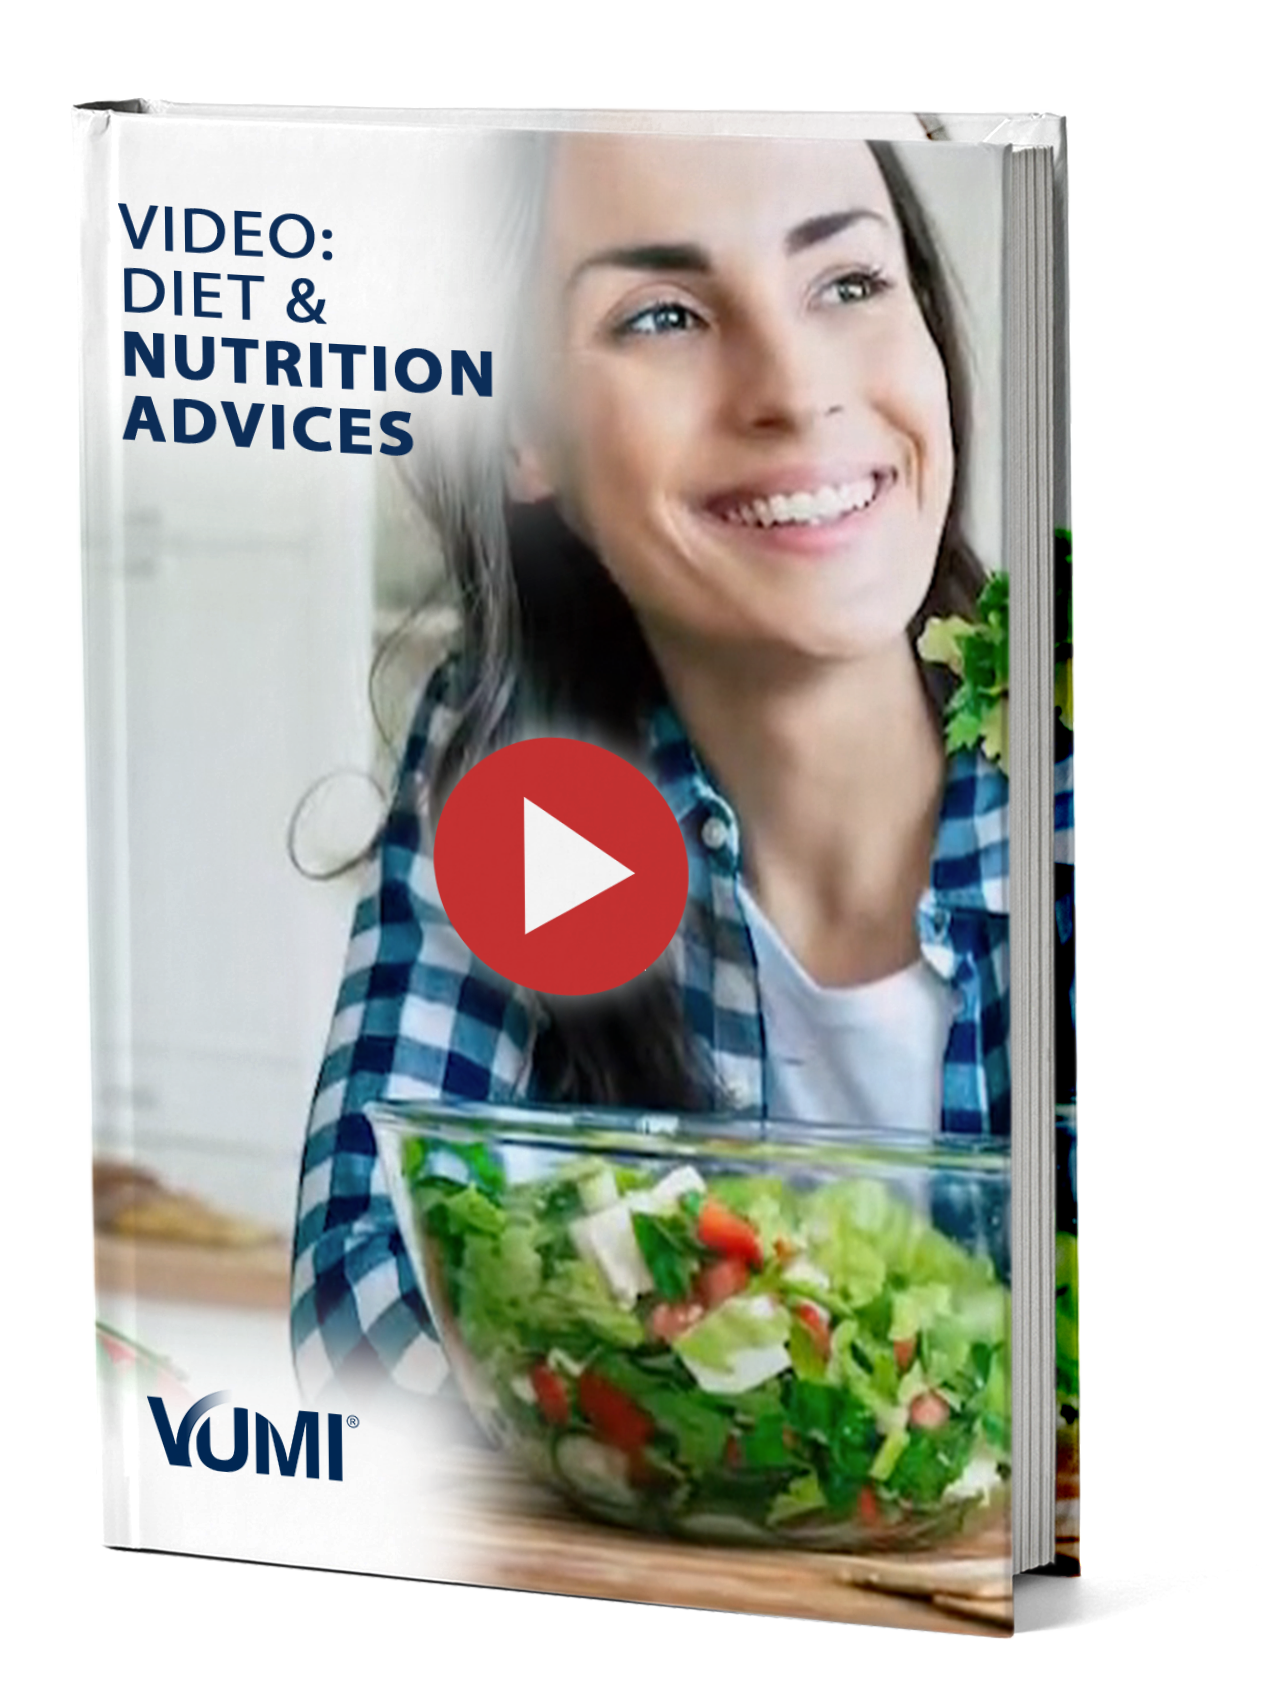 Video diet & nutrition advices